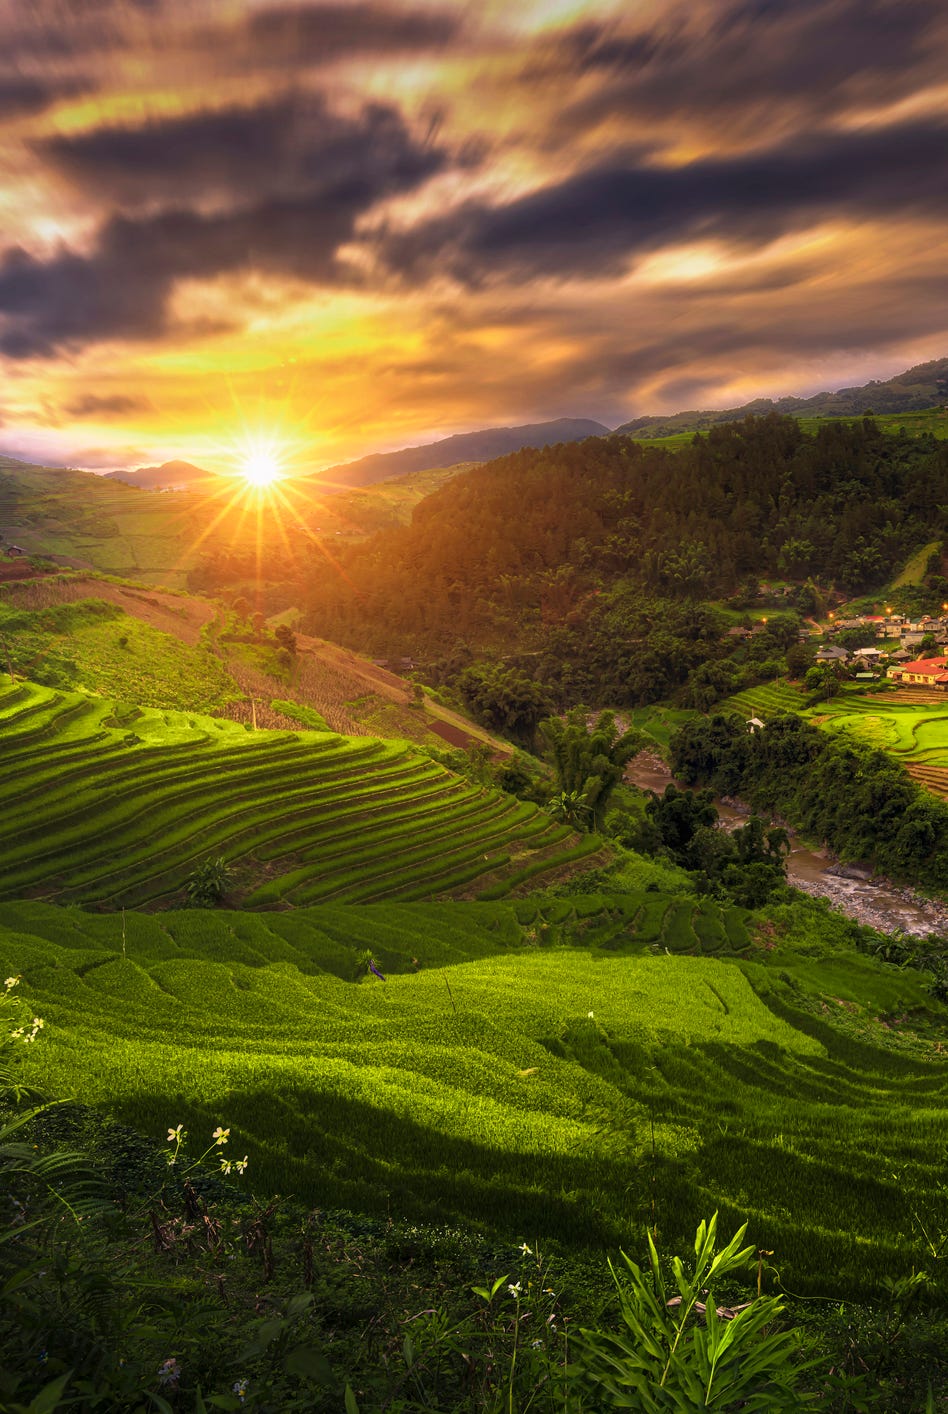 city ​​in the valley beautiful with light coming through the city the city is located in the north of vietnam called mu cang chai it is a destination for tourists who want to explore nature, rice terraces and relax during sunset